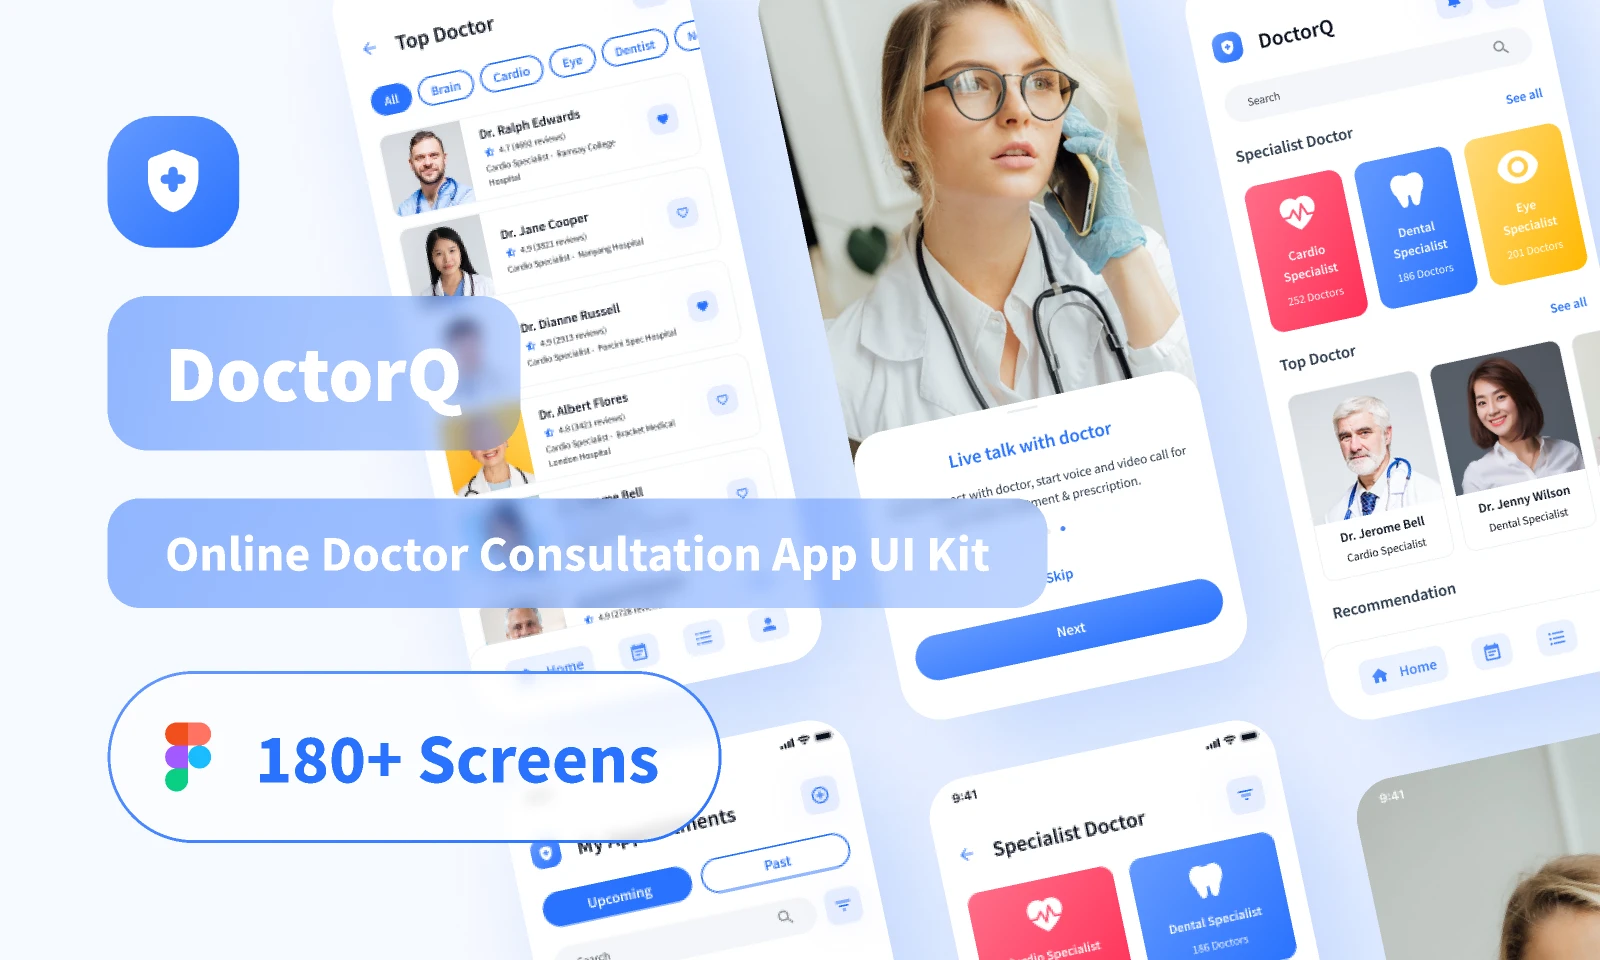 DoctorQ - Online Doctor Consultation App UI Kit for Figma and Adobe XD